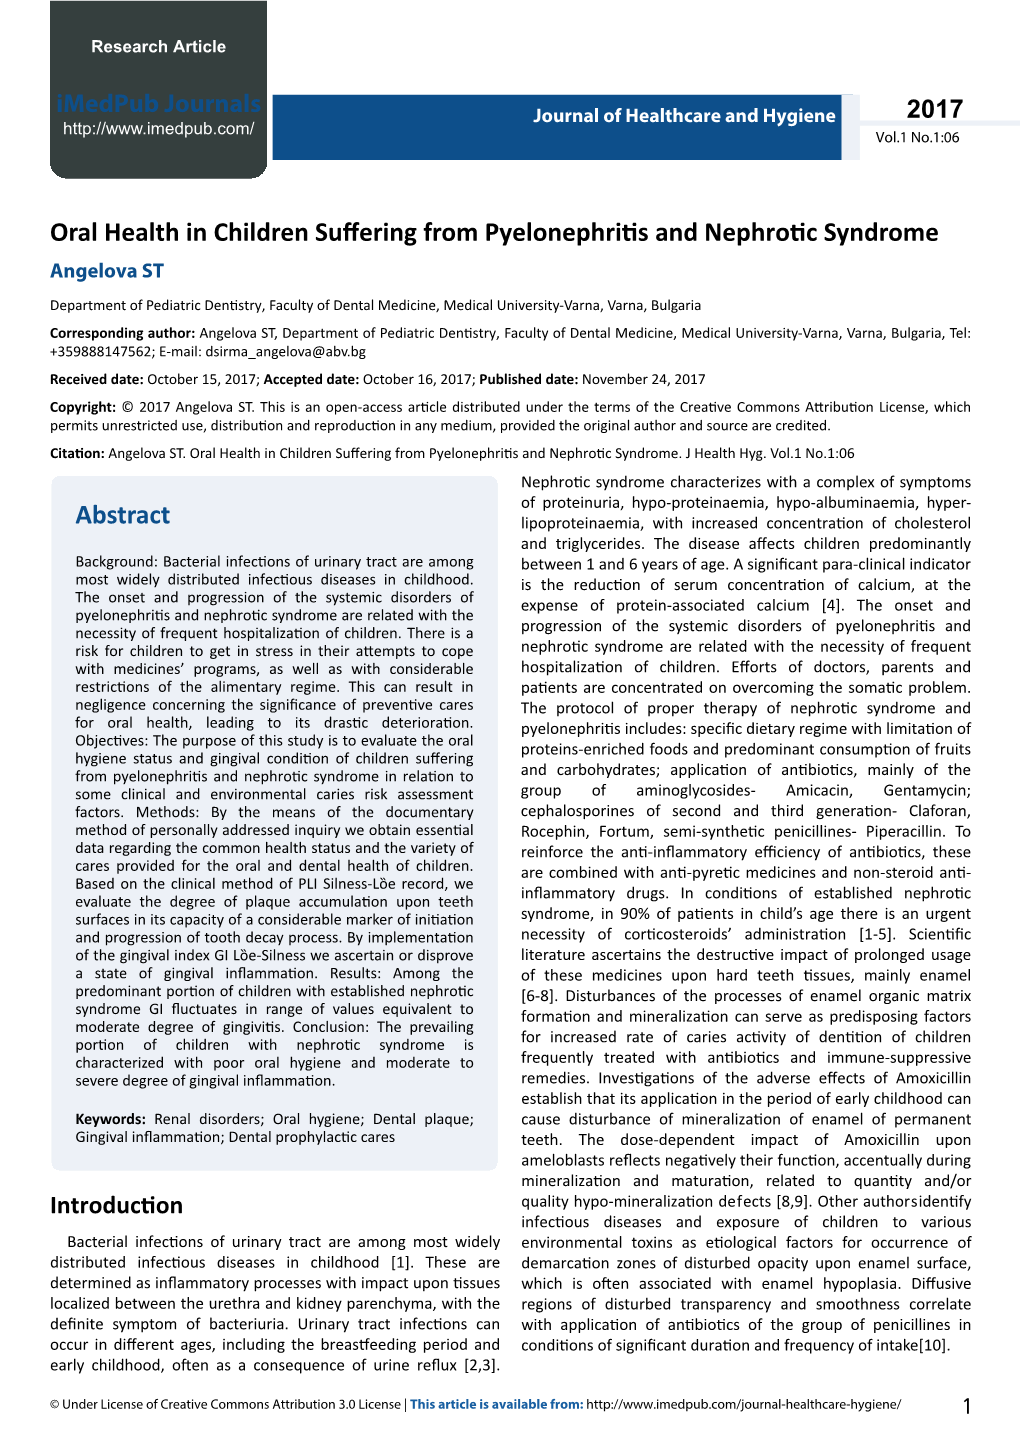 Oral Health in Children Suffering from Pyelonephritis and Nephrotic Syndrome Angelova ST